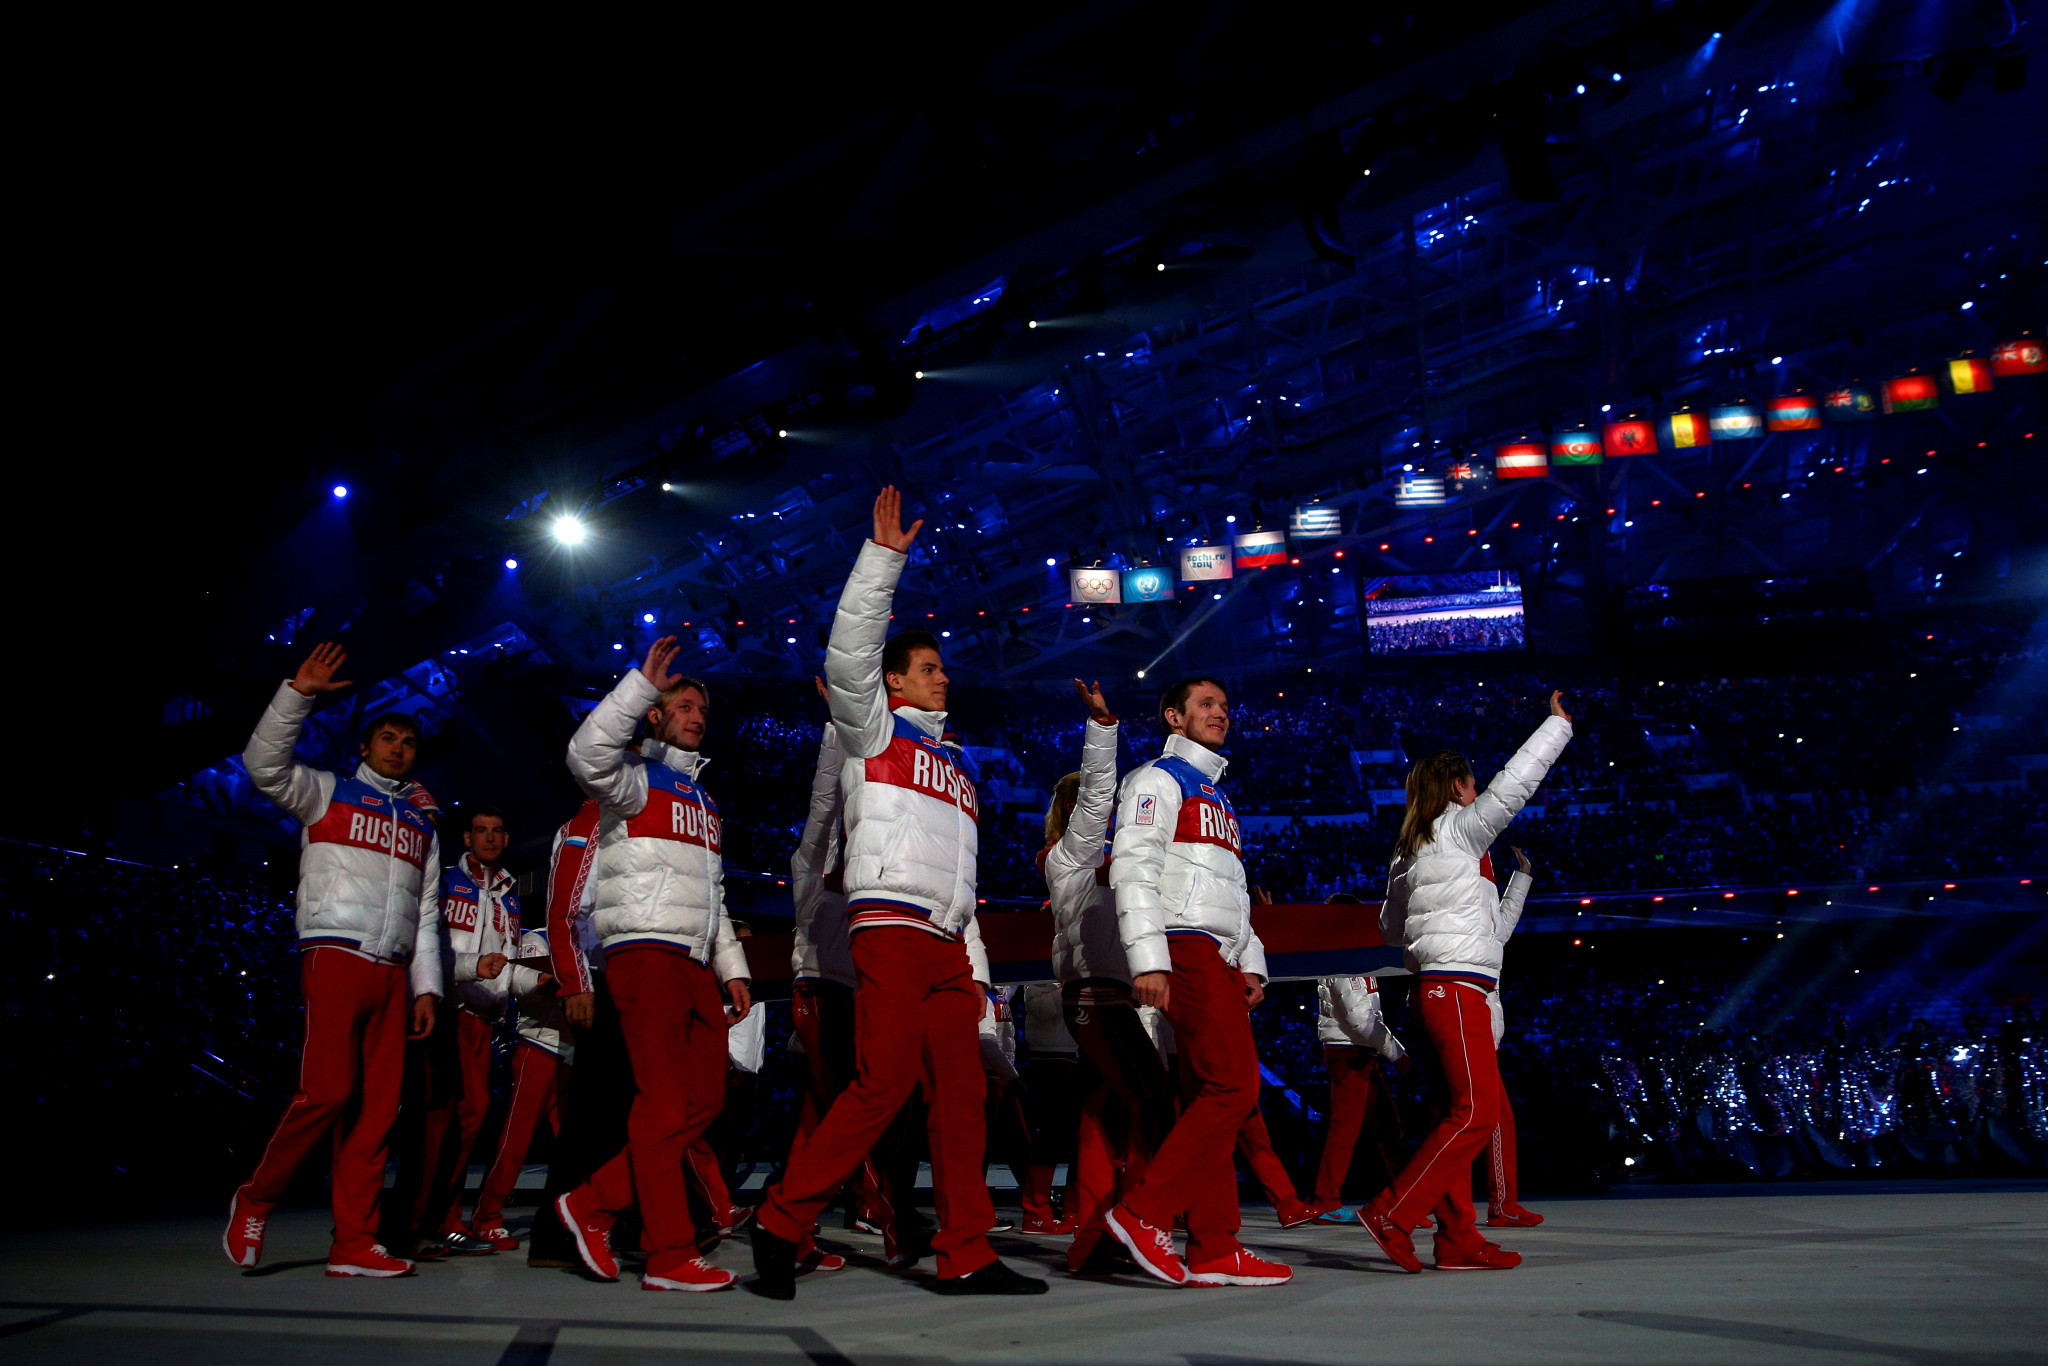 Russia have been knocked off the top of the Sochi 2014 Olympic medal standings following the sanctioning of athletes by the International Olympic Committee for doping at the Games ©Getty Images